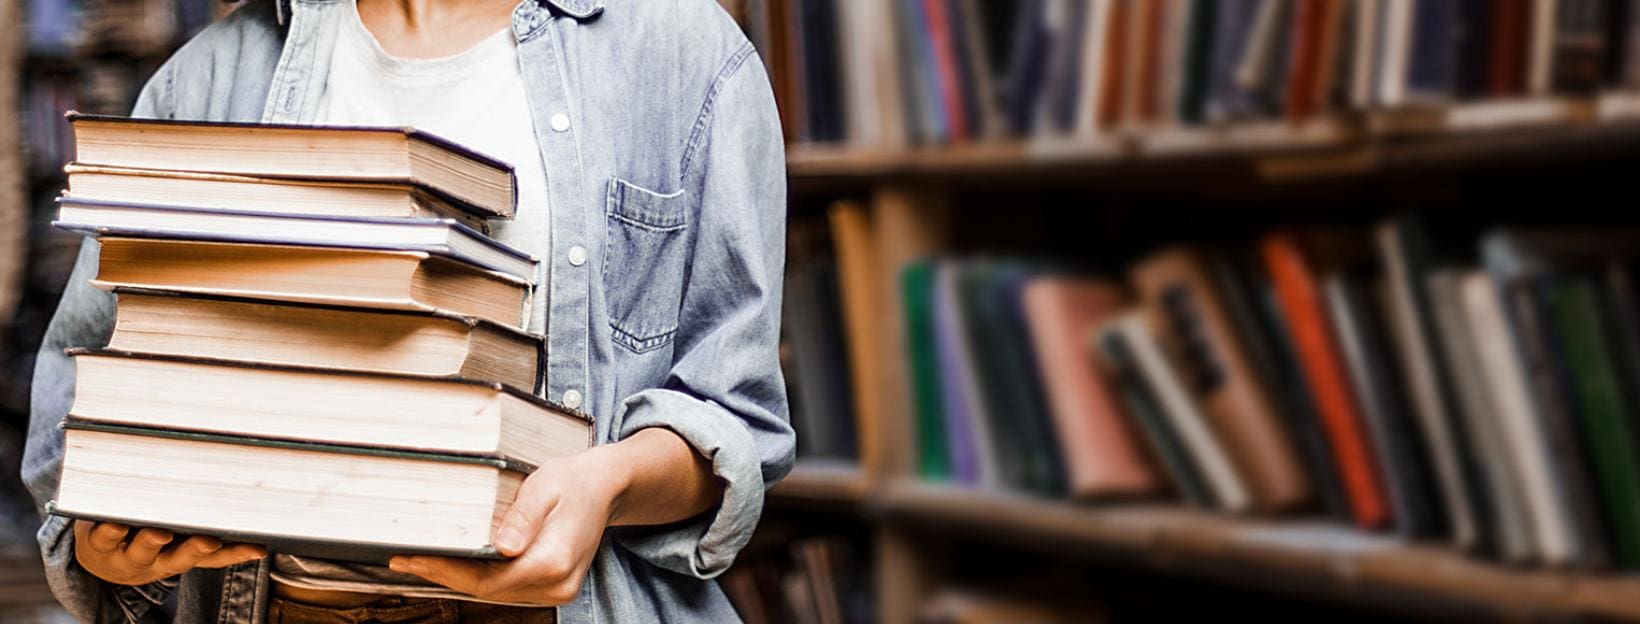 student holding books in a library